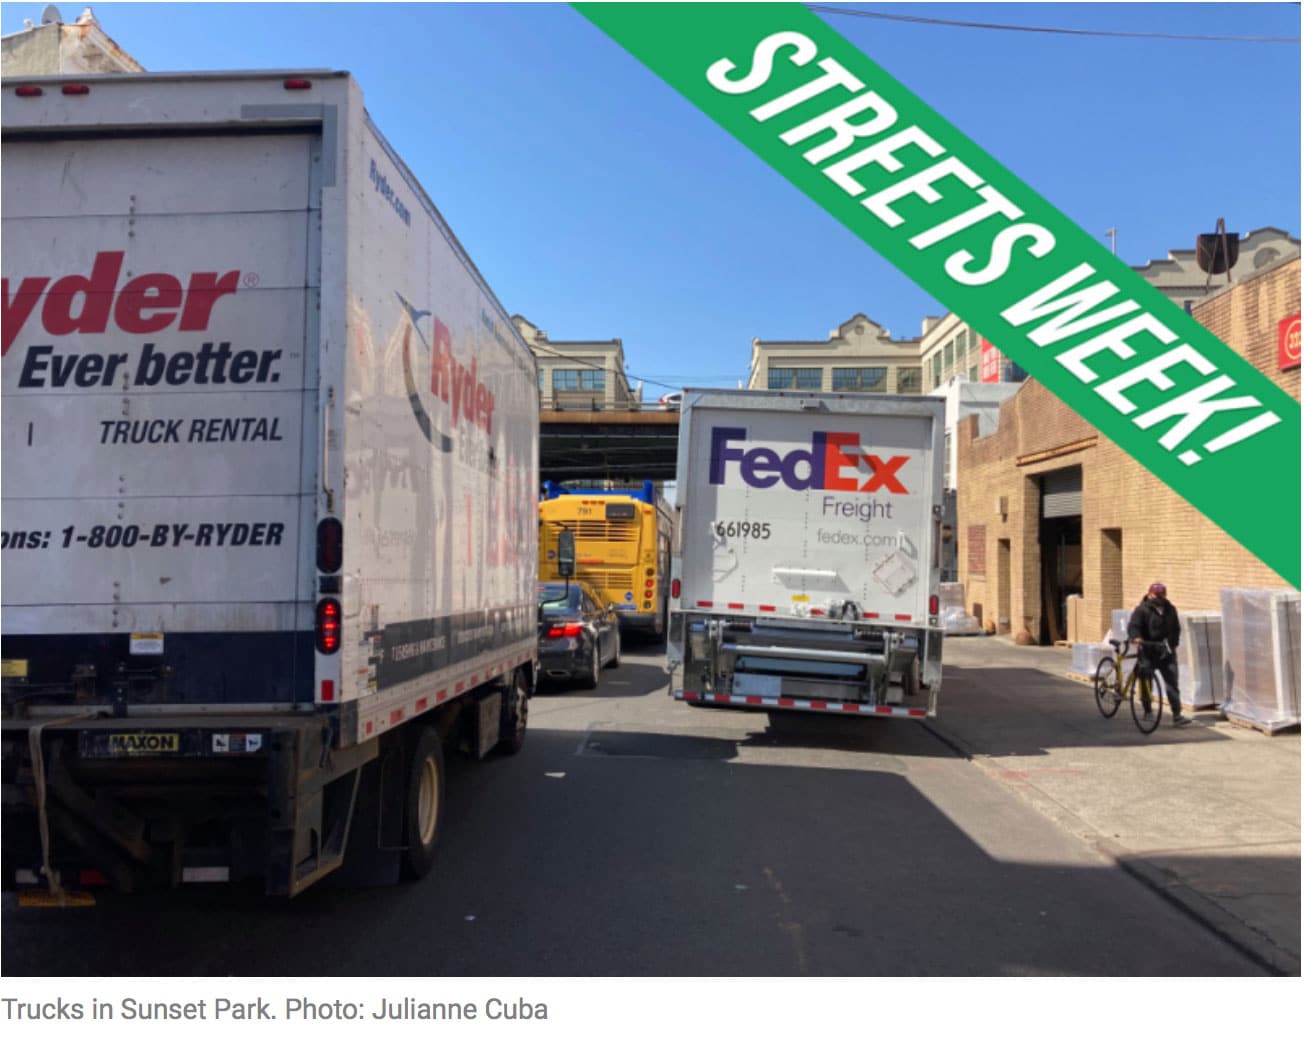 STREETS WEEK! New Truck Management Report is Heavy on Historic Details; Light on Future Plans